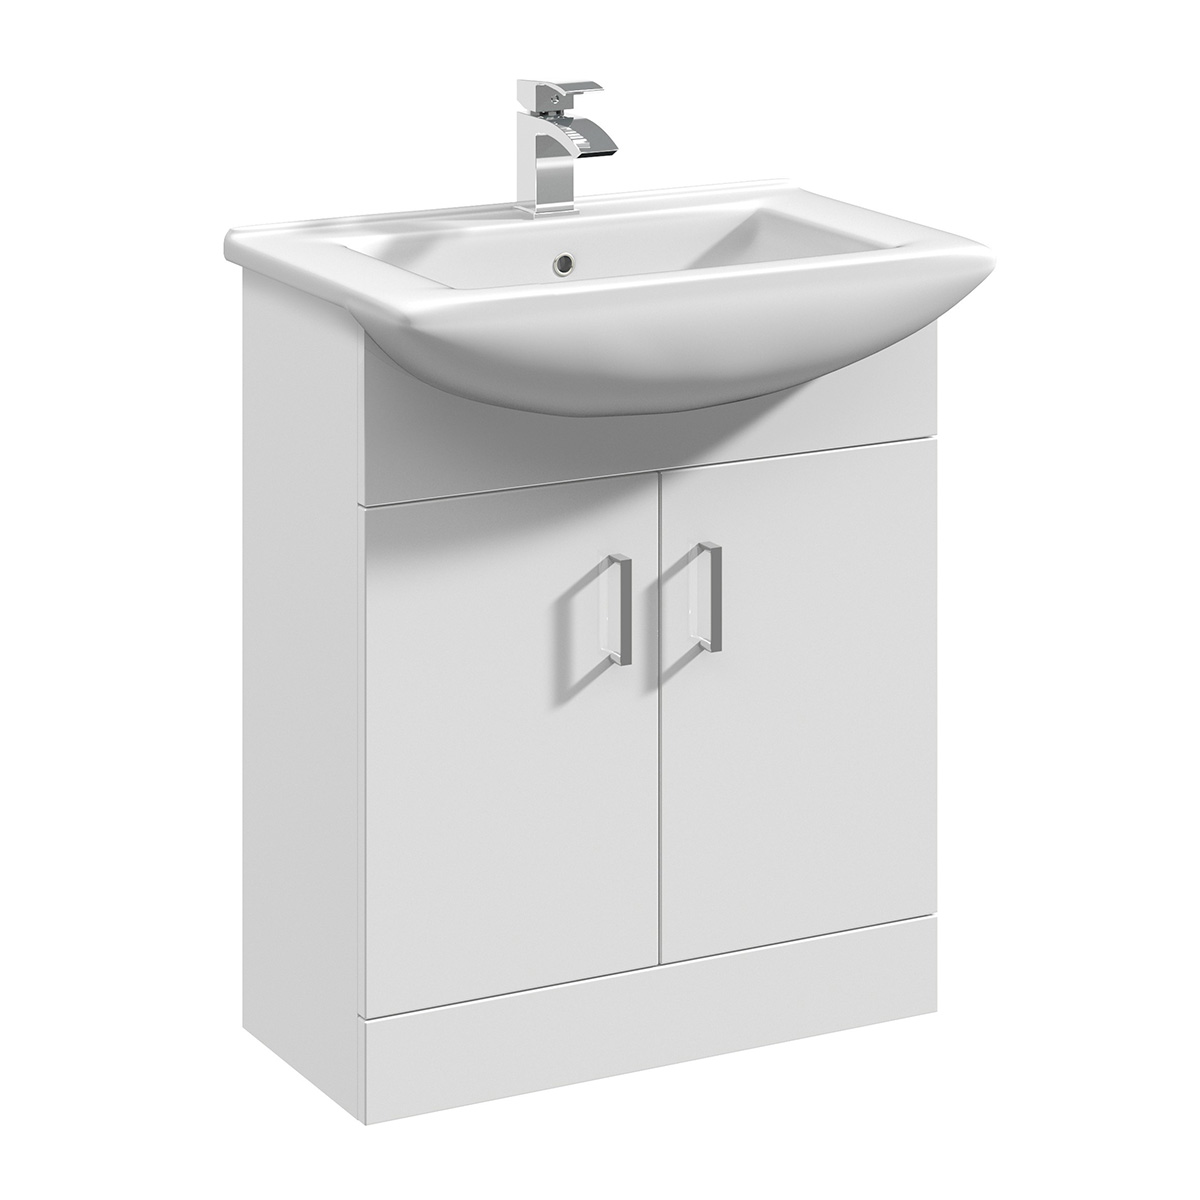 Nuie Mayford 650mm Floor Standing Gloss White Cabinet & Ceramic Square Basin (19455)